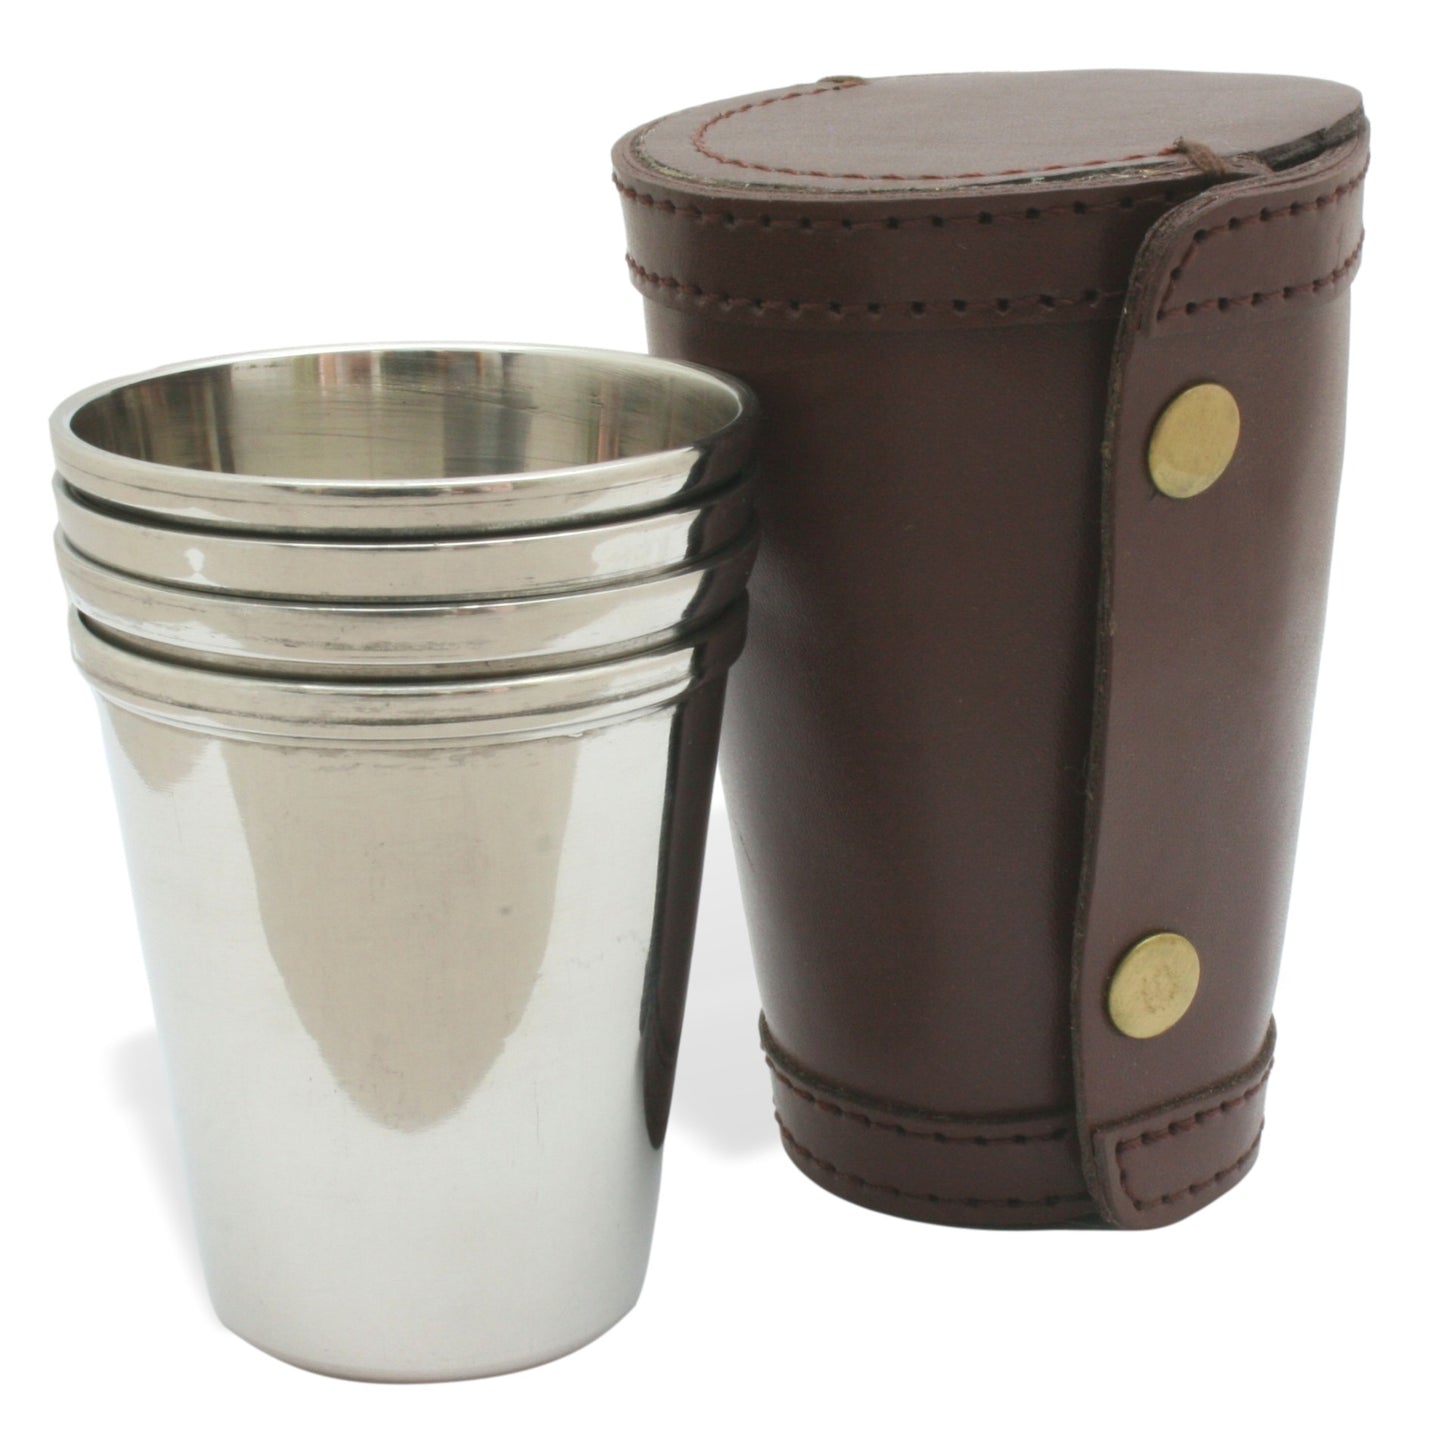 4 stacking cups with a leather popper case